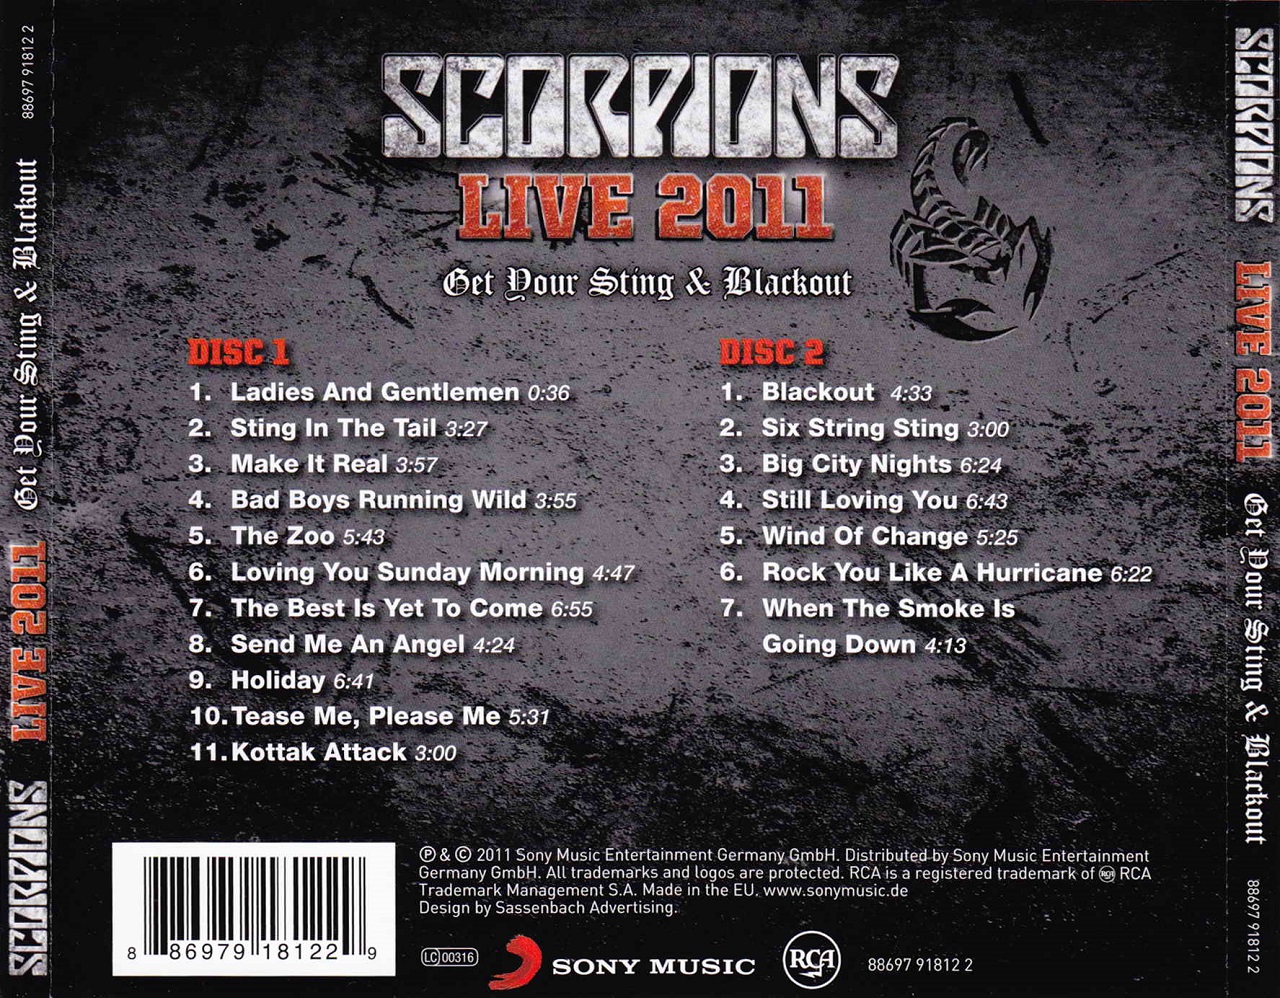 Scorpions going. Live 2011: get your Sting & Blackout. Scorpions Blackout обложка. DVD обложка Scorpions - Blackout. Scorpions Live 2011 обложка альбома.